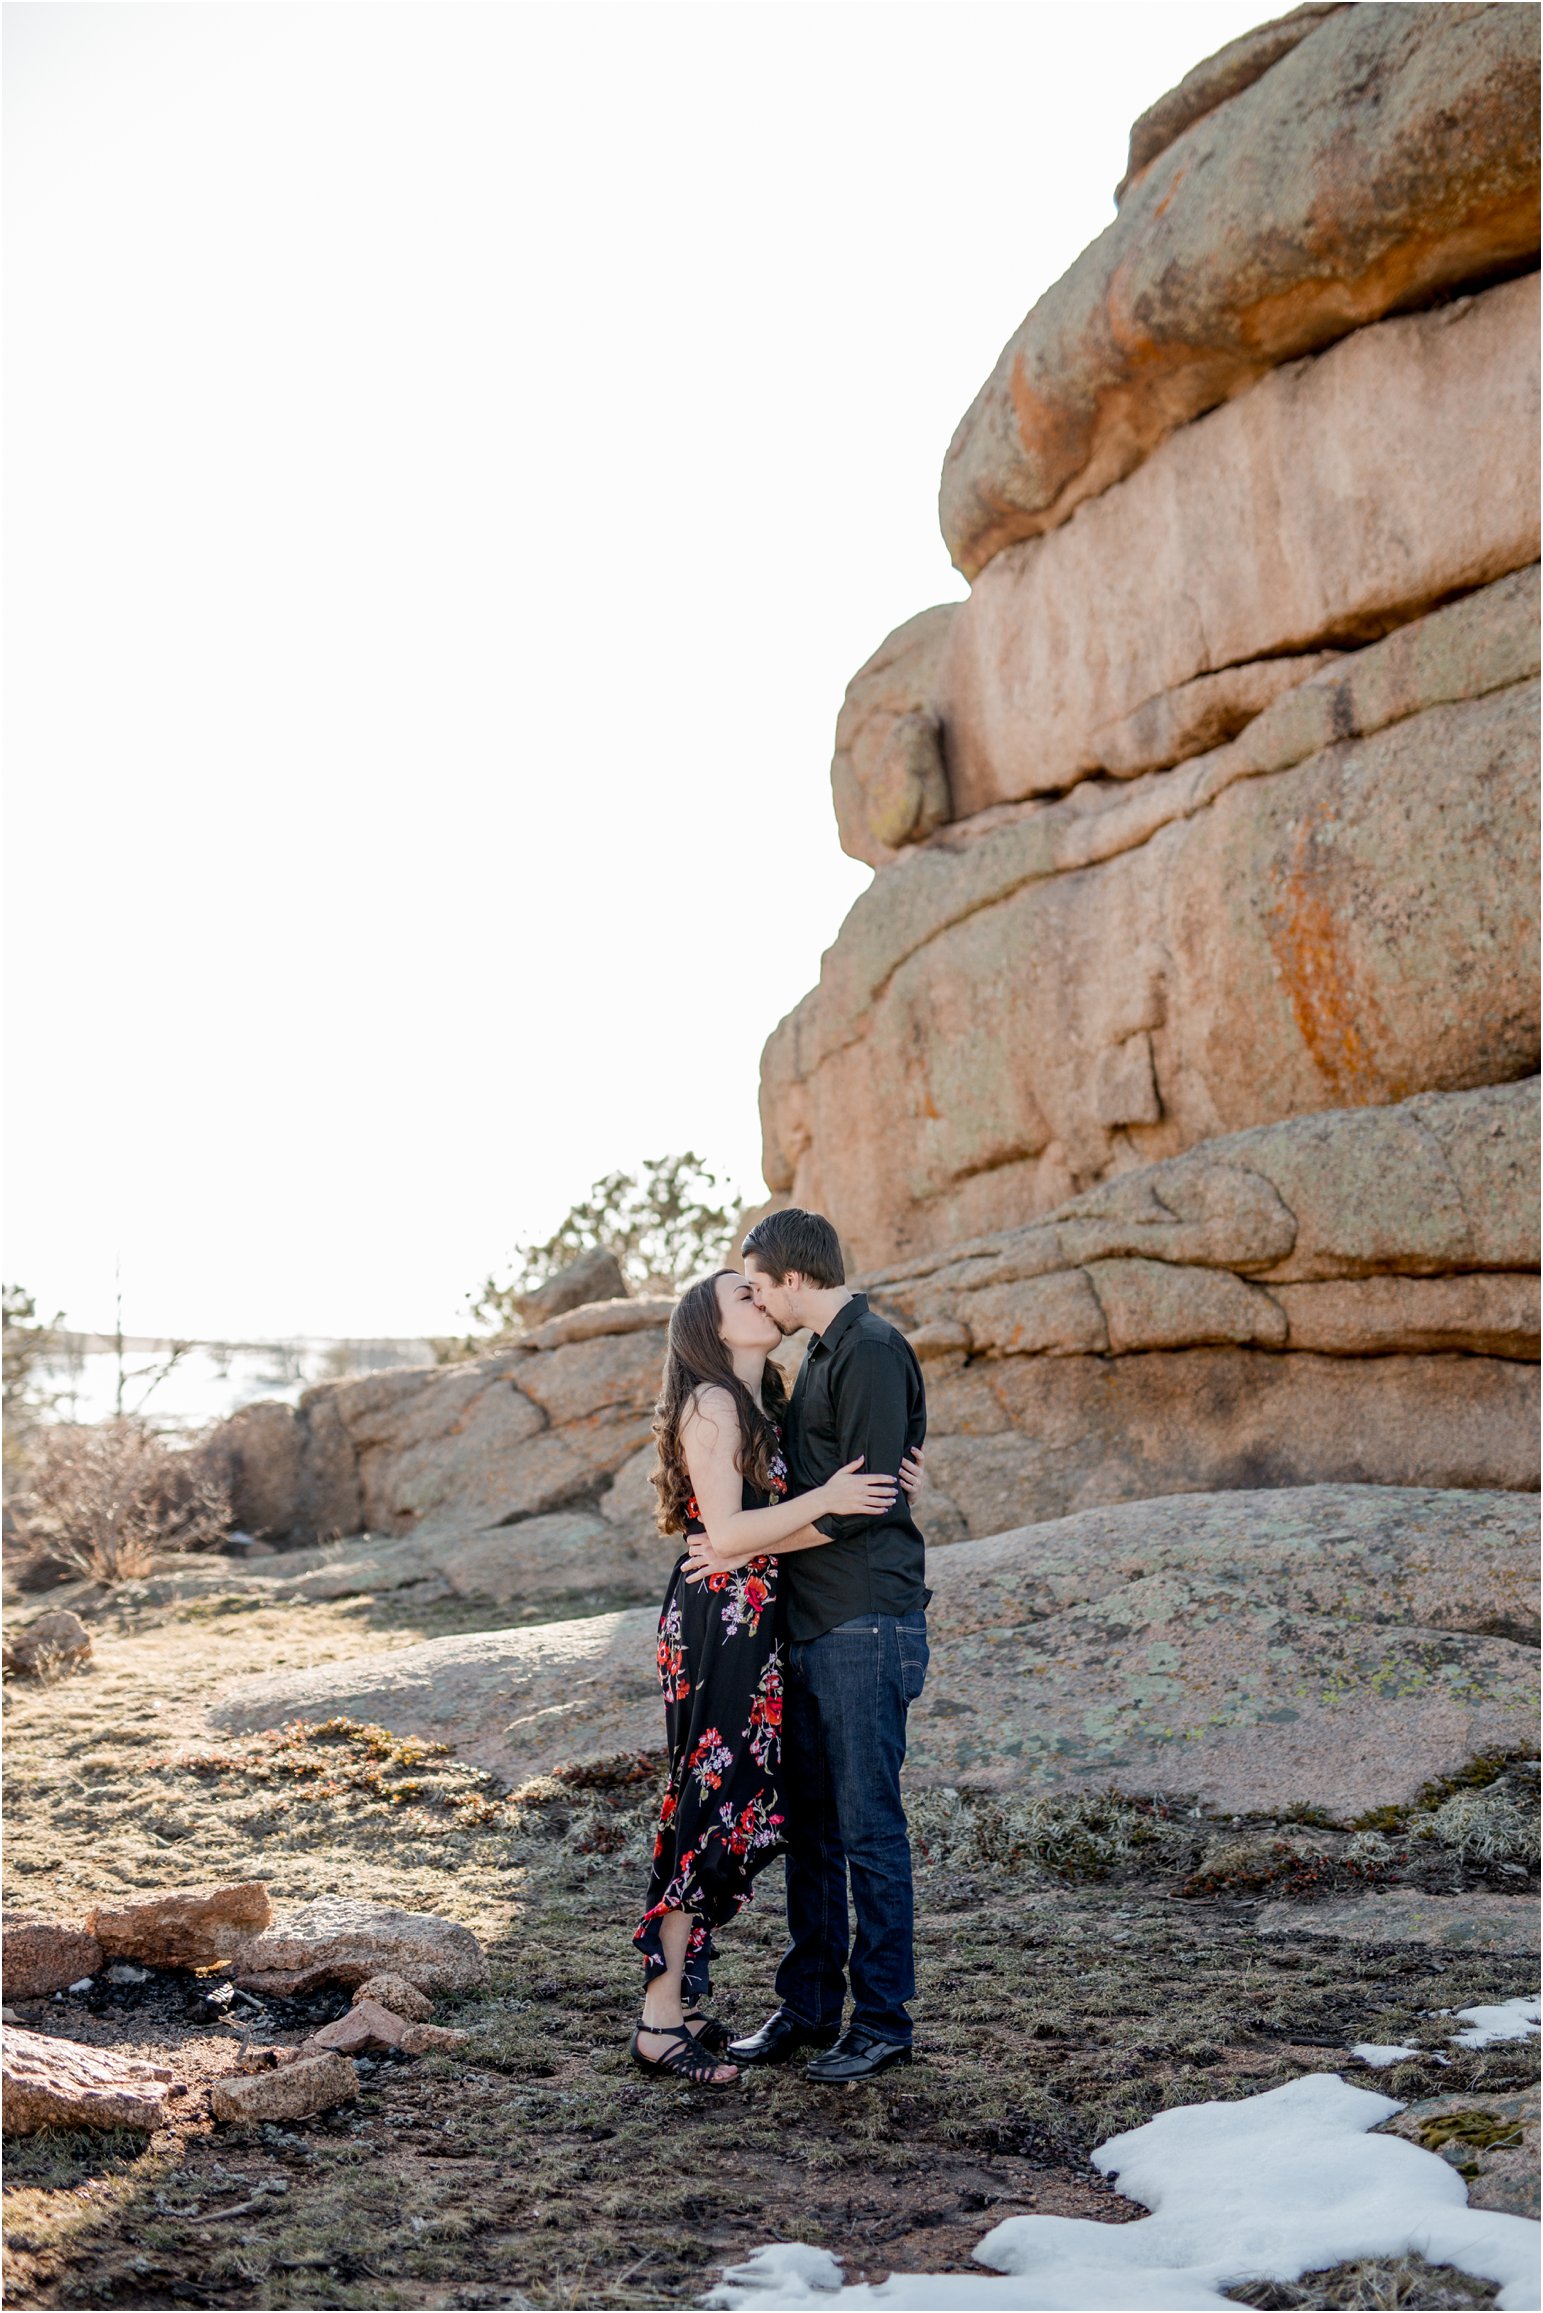 Cheyenne, Wyoming Engagement Session at Vedauwoo by Greeley, Colorado Wedding Photographer